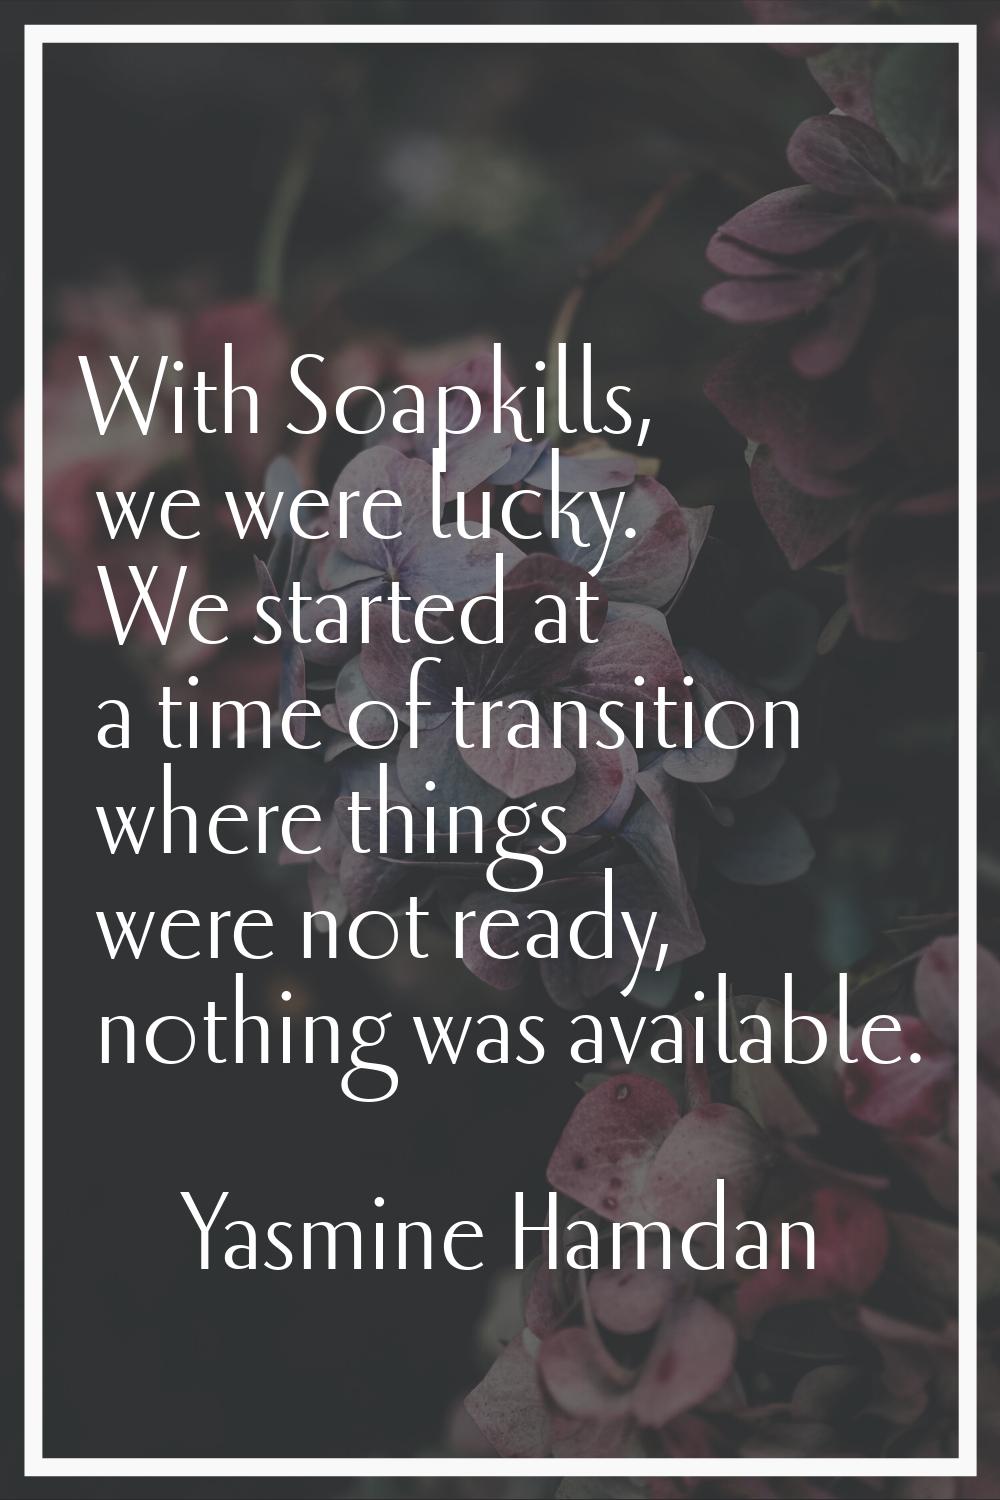 With Soapkills, we were lucky. We started at a time of transition where things were not ready, noth